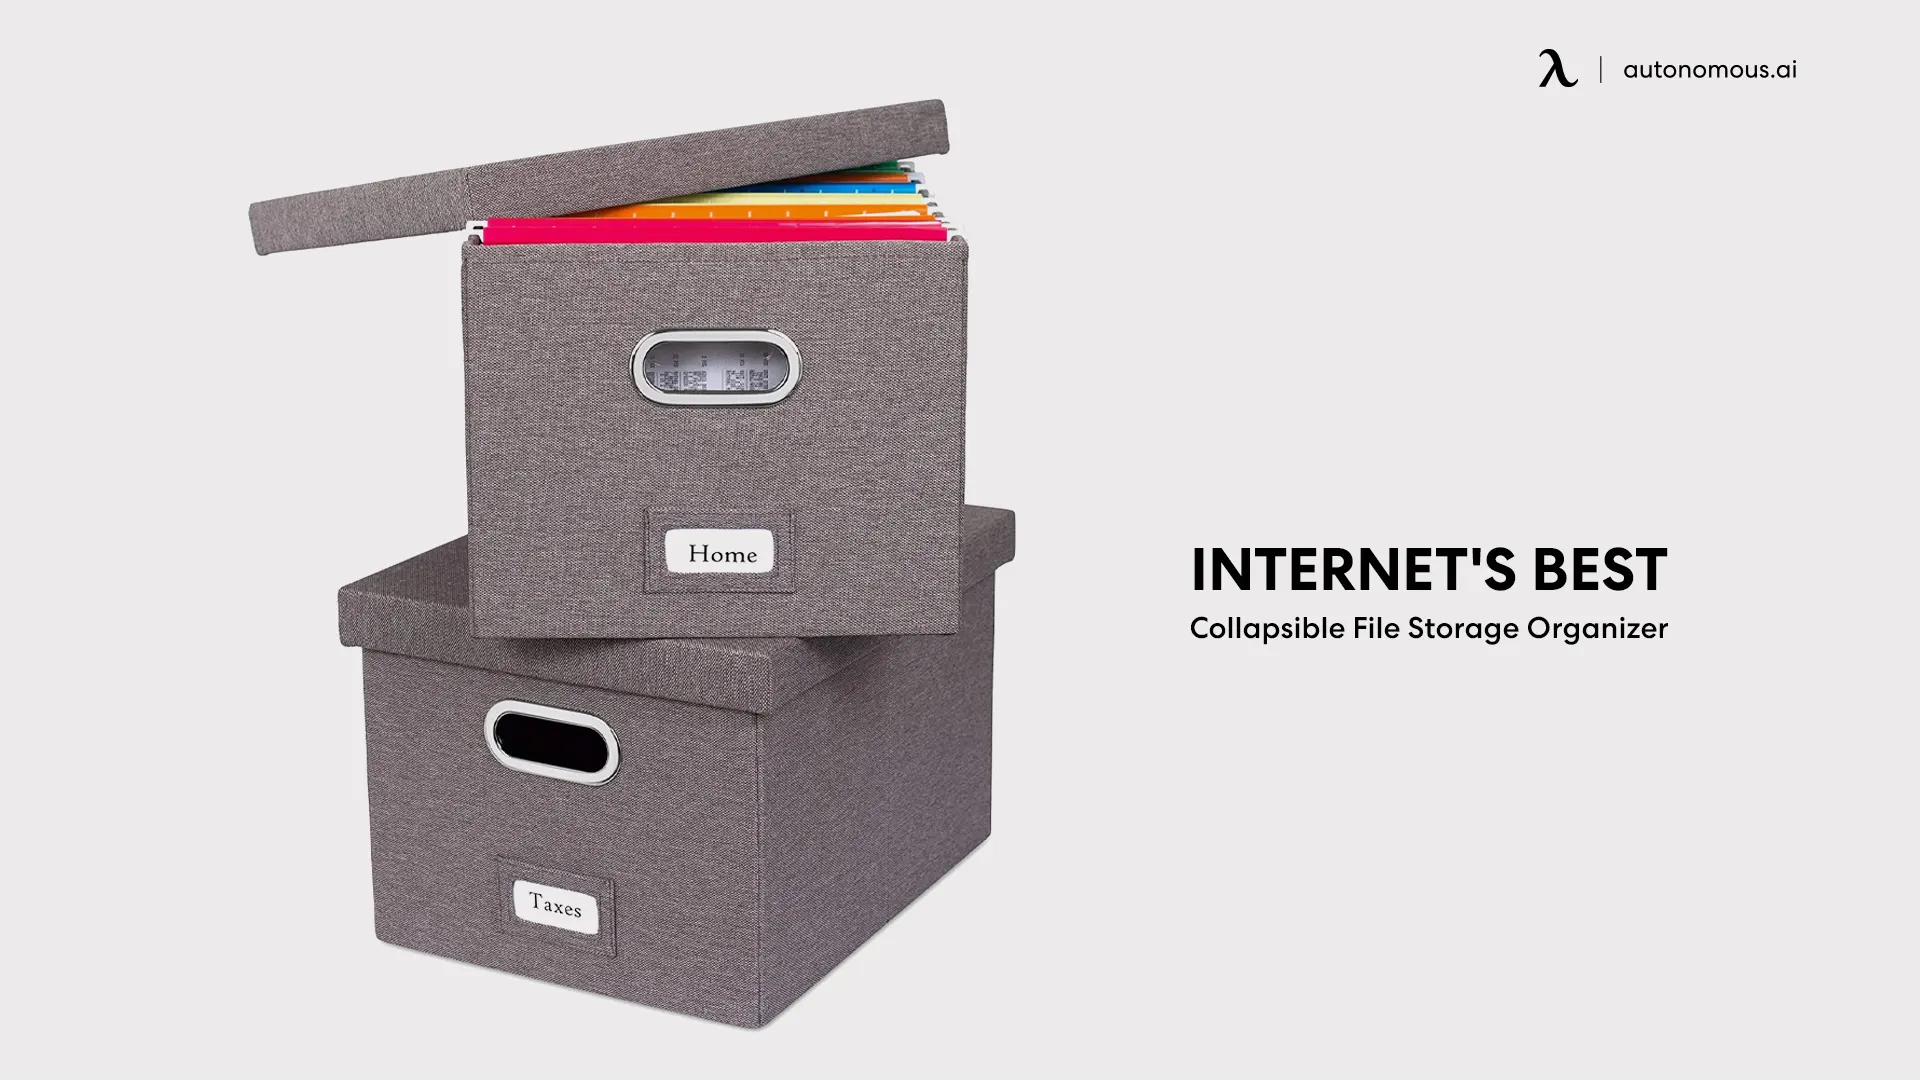 Look For a Foldable File Storage Box